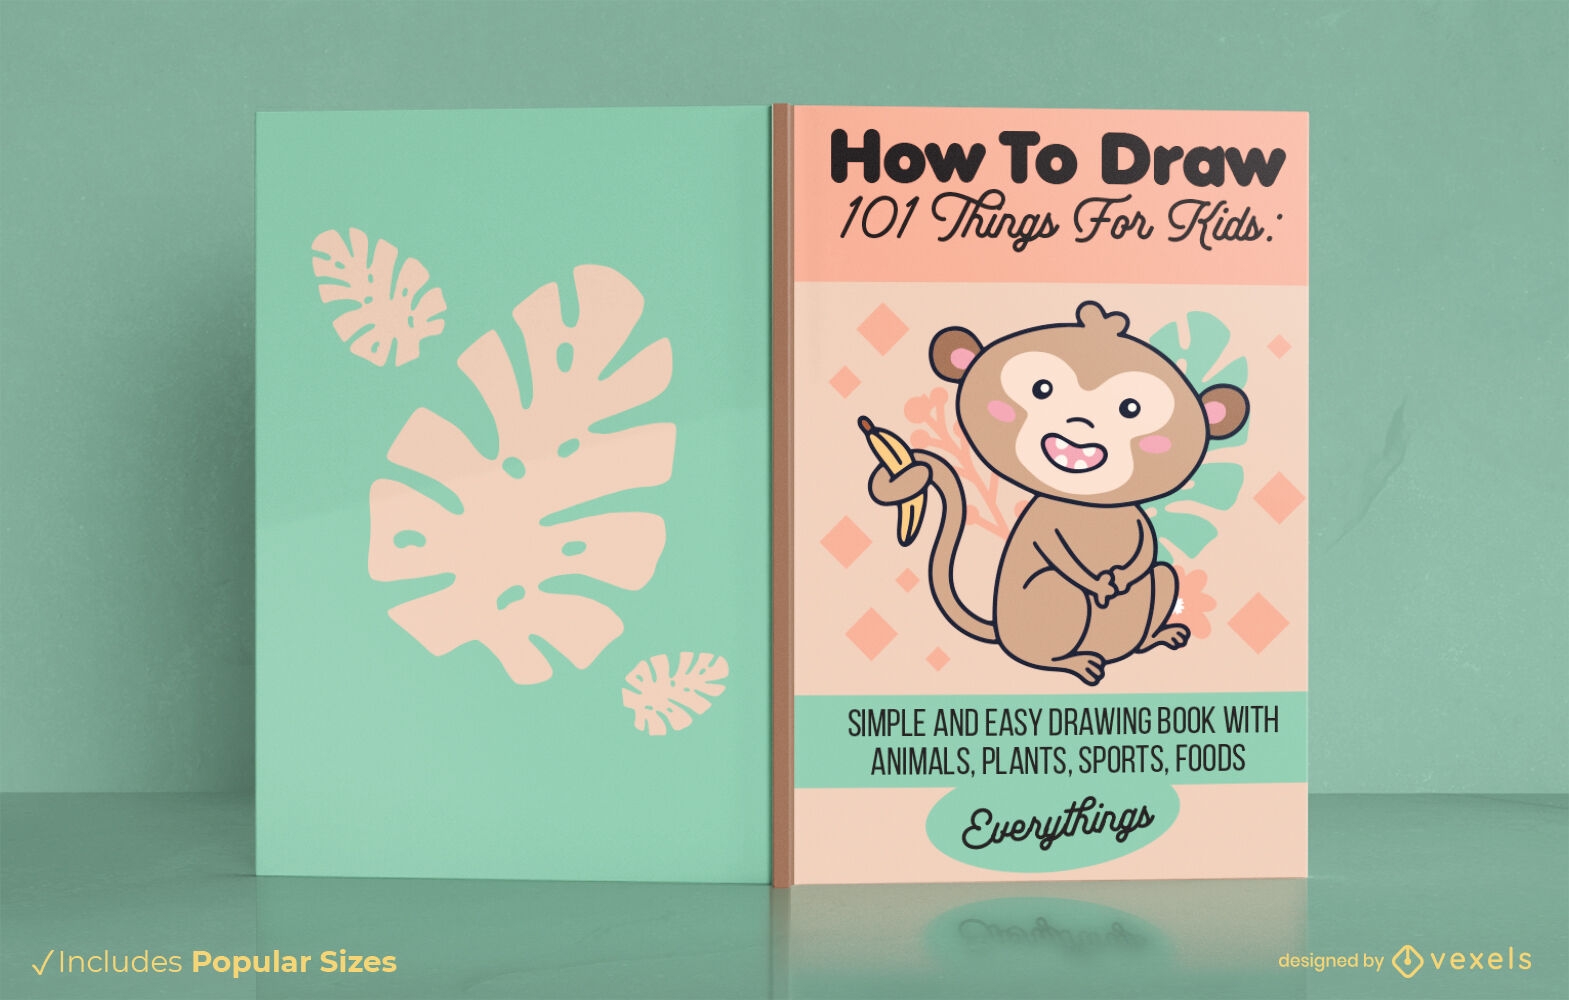 Animal drawing guide book cover design